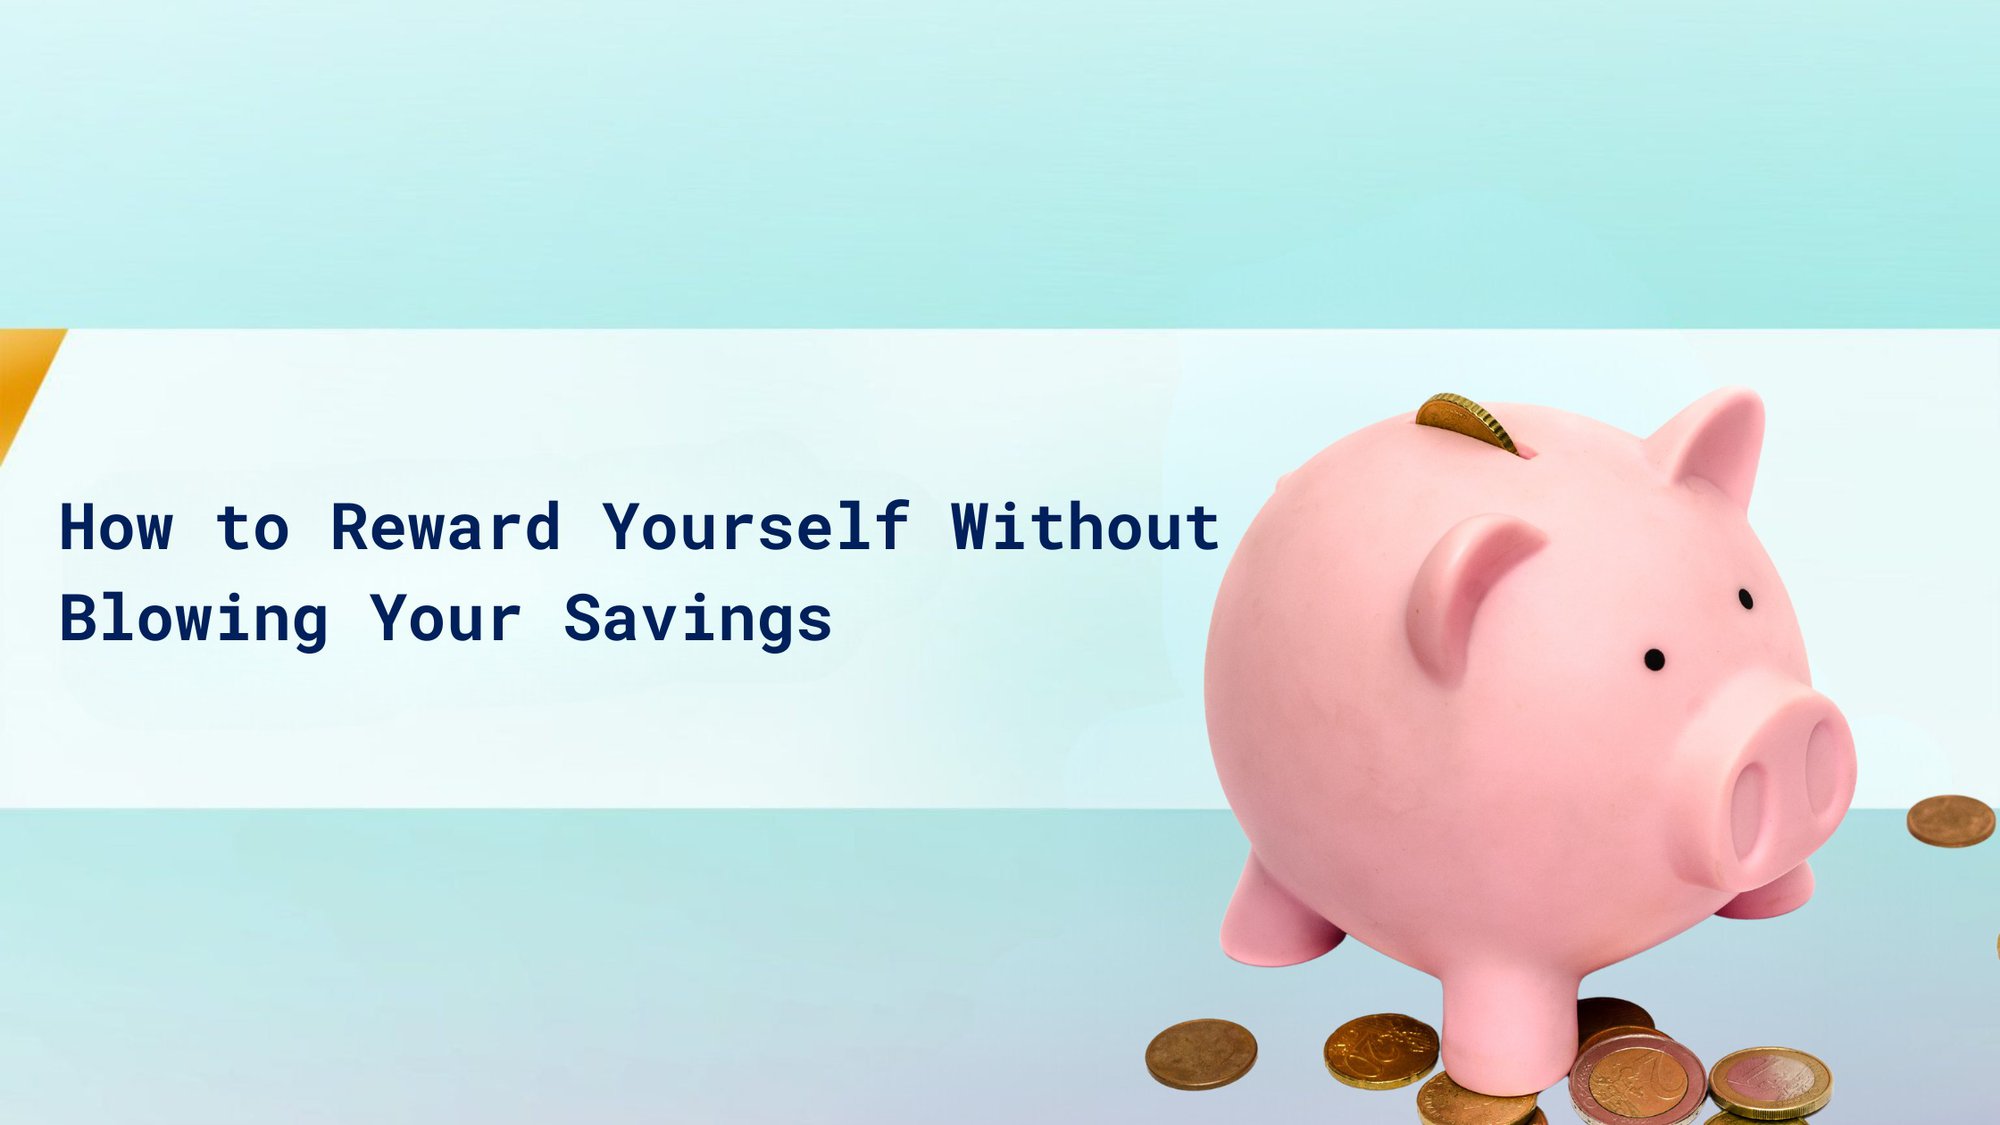 How to reward yourself without blowing your savings